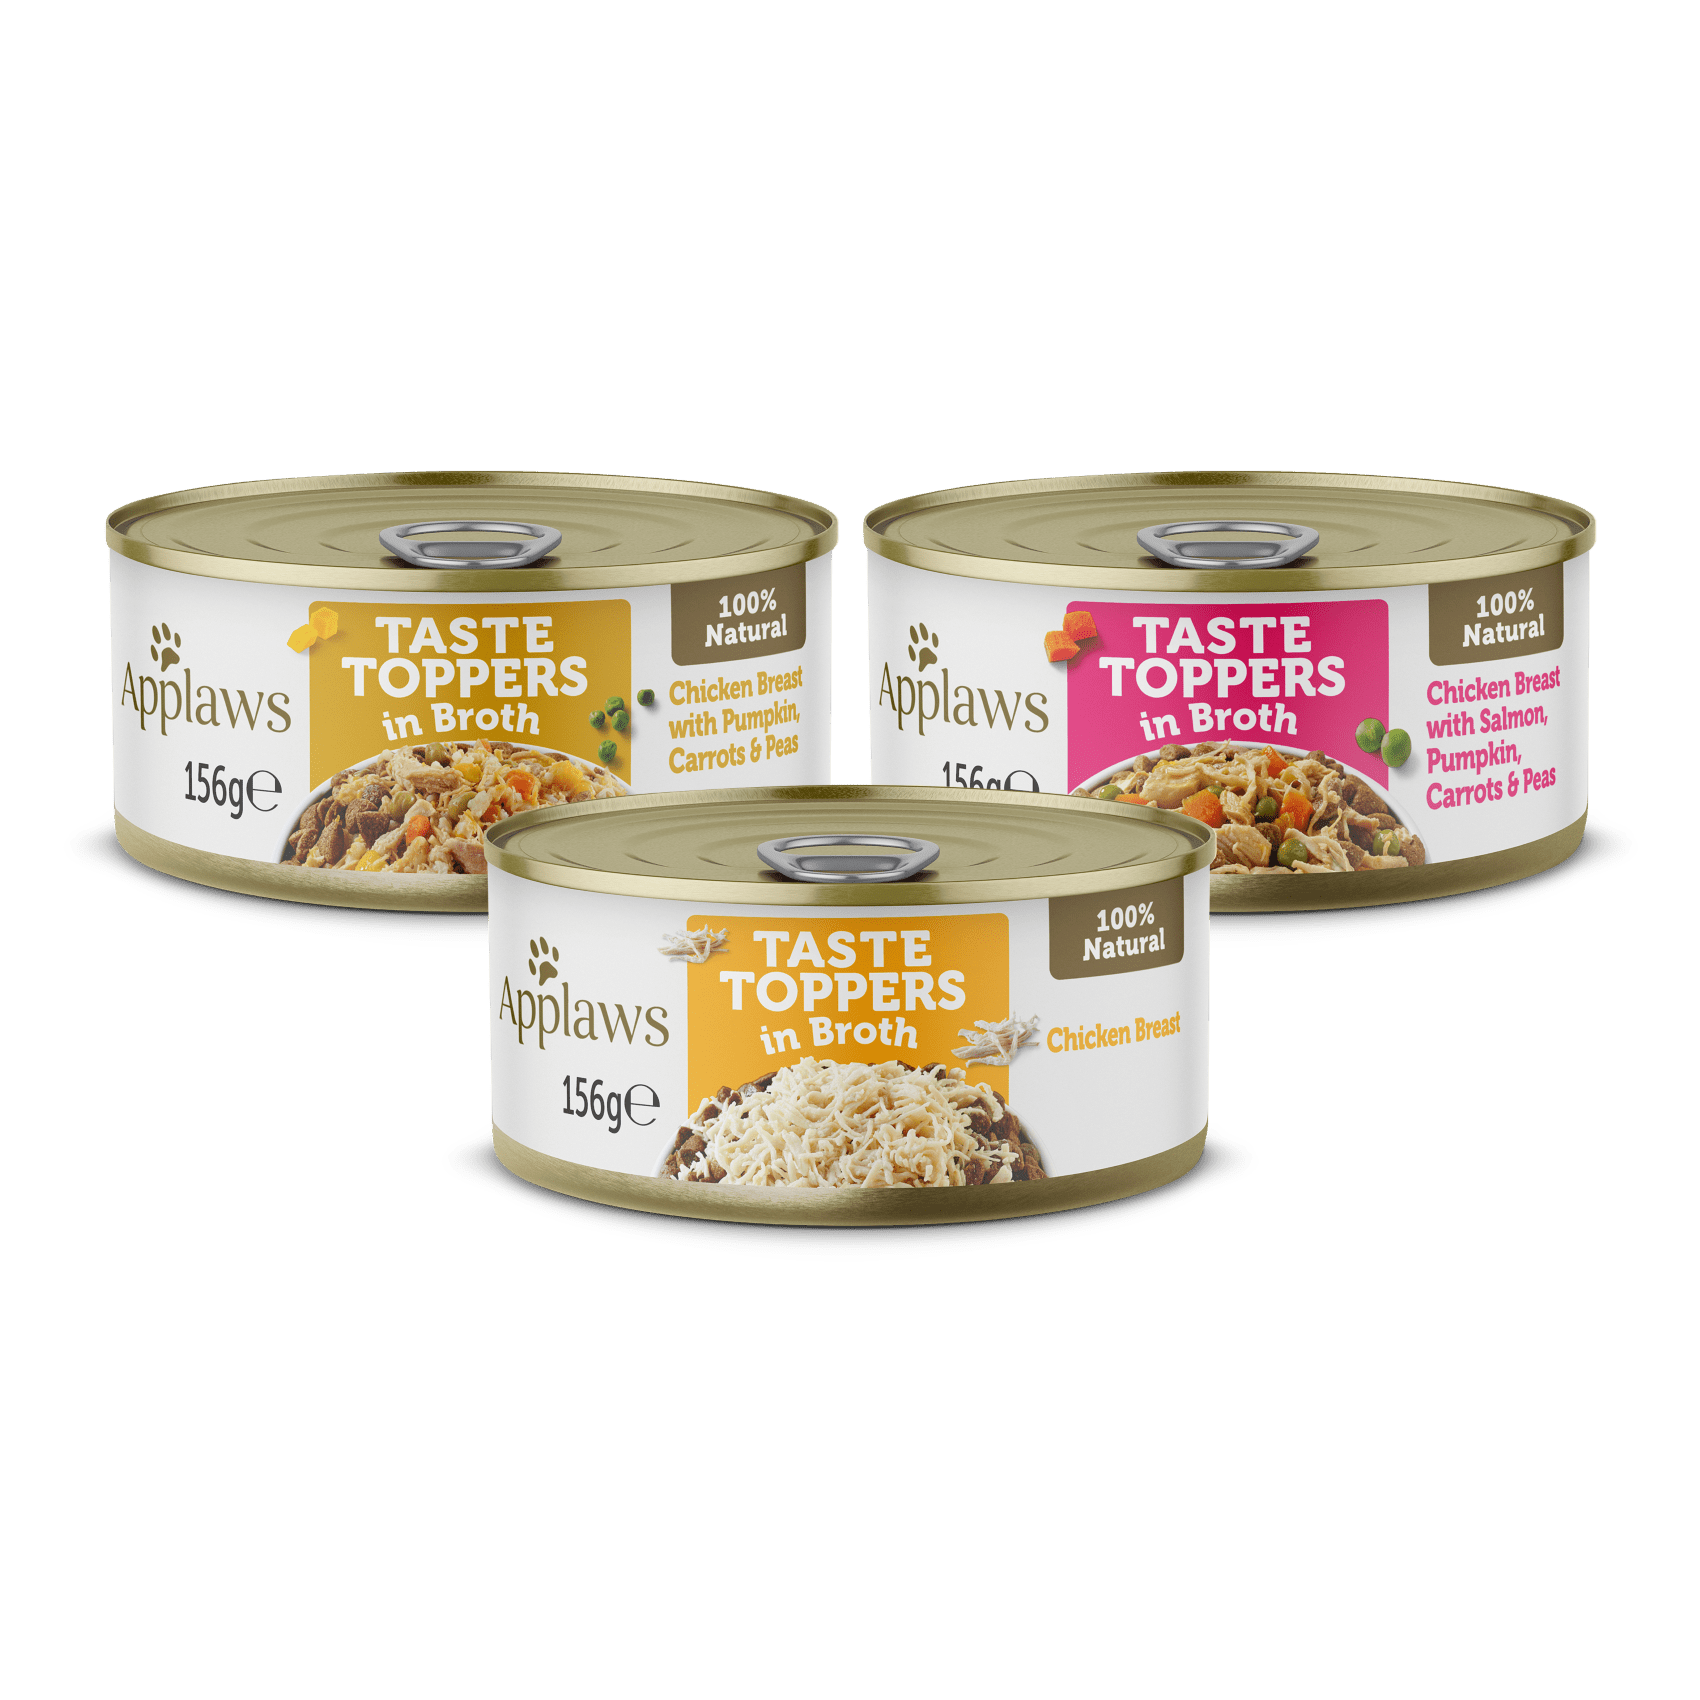 Applaws Taste Toppers Chicken in Broth Tin 4x (8x156g), Applaws,